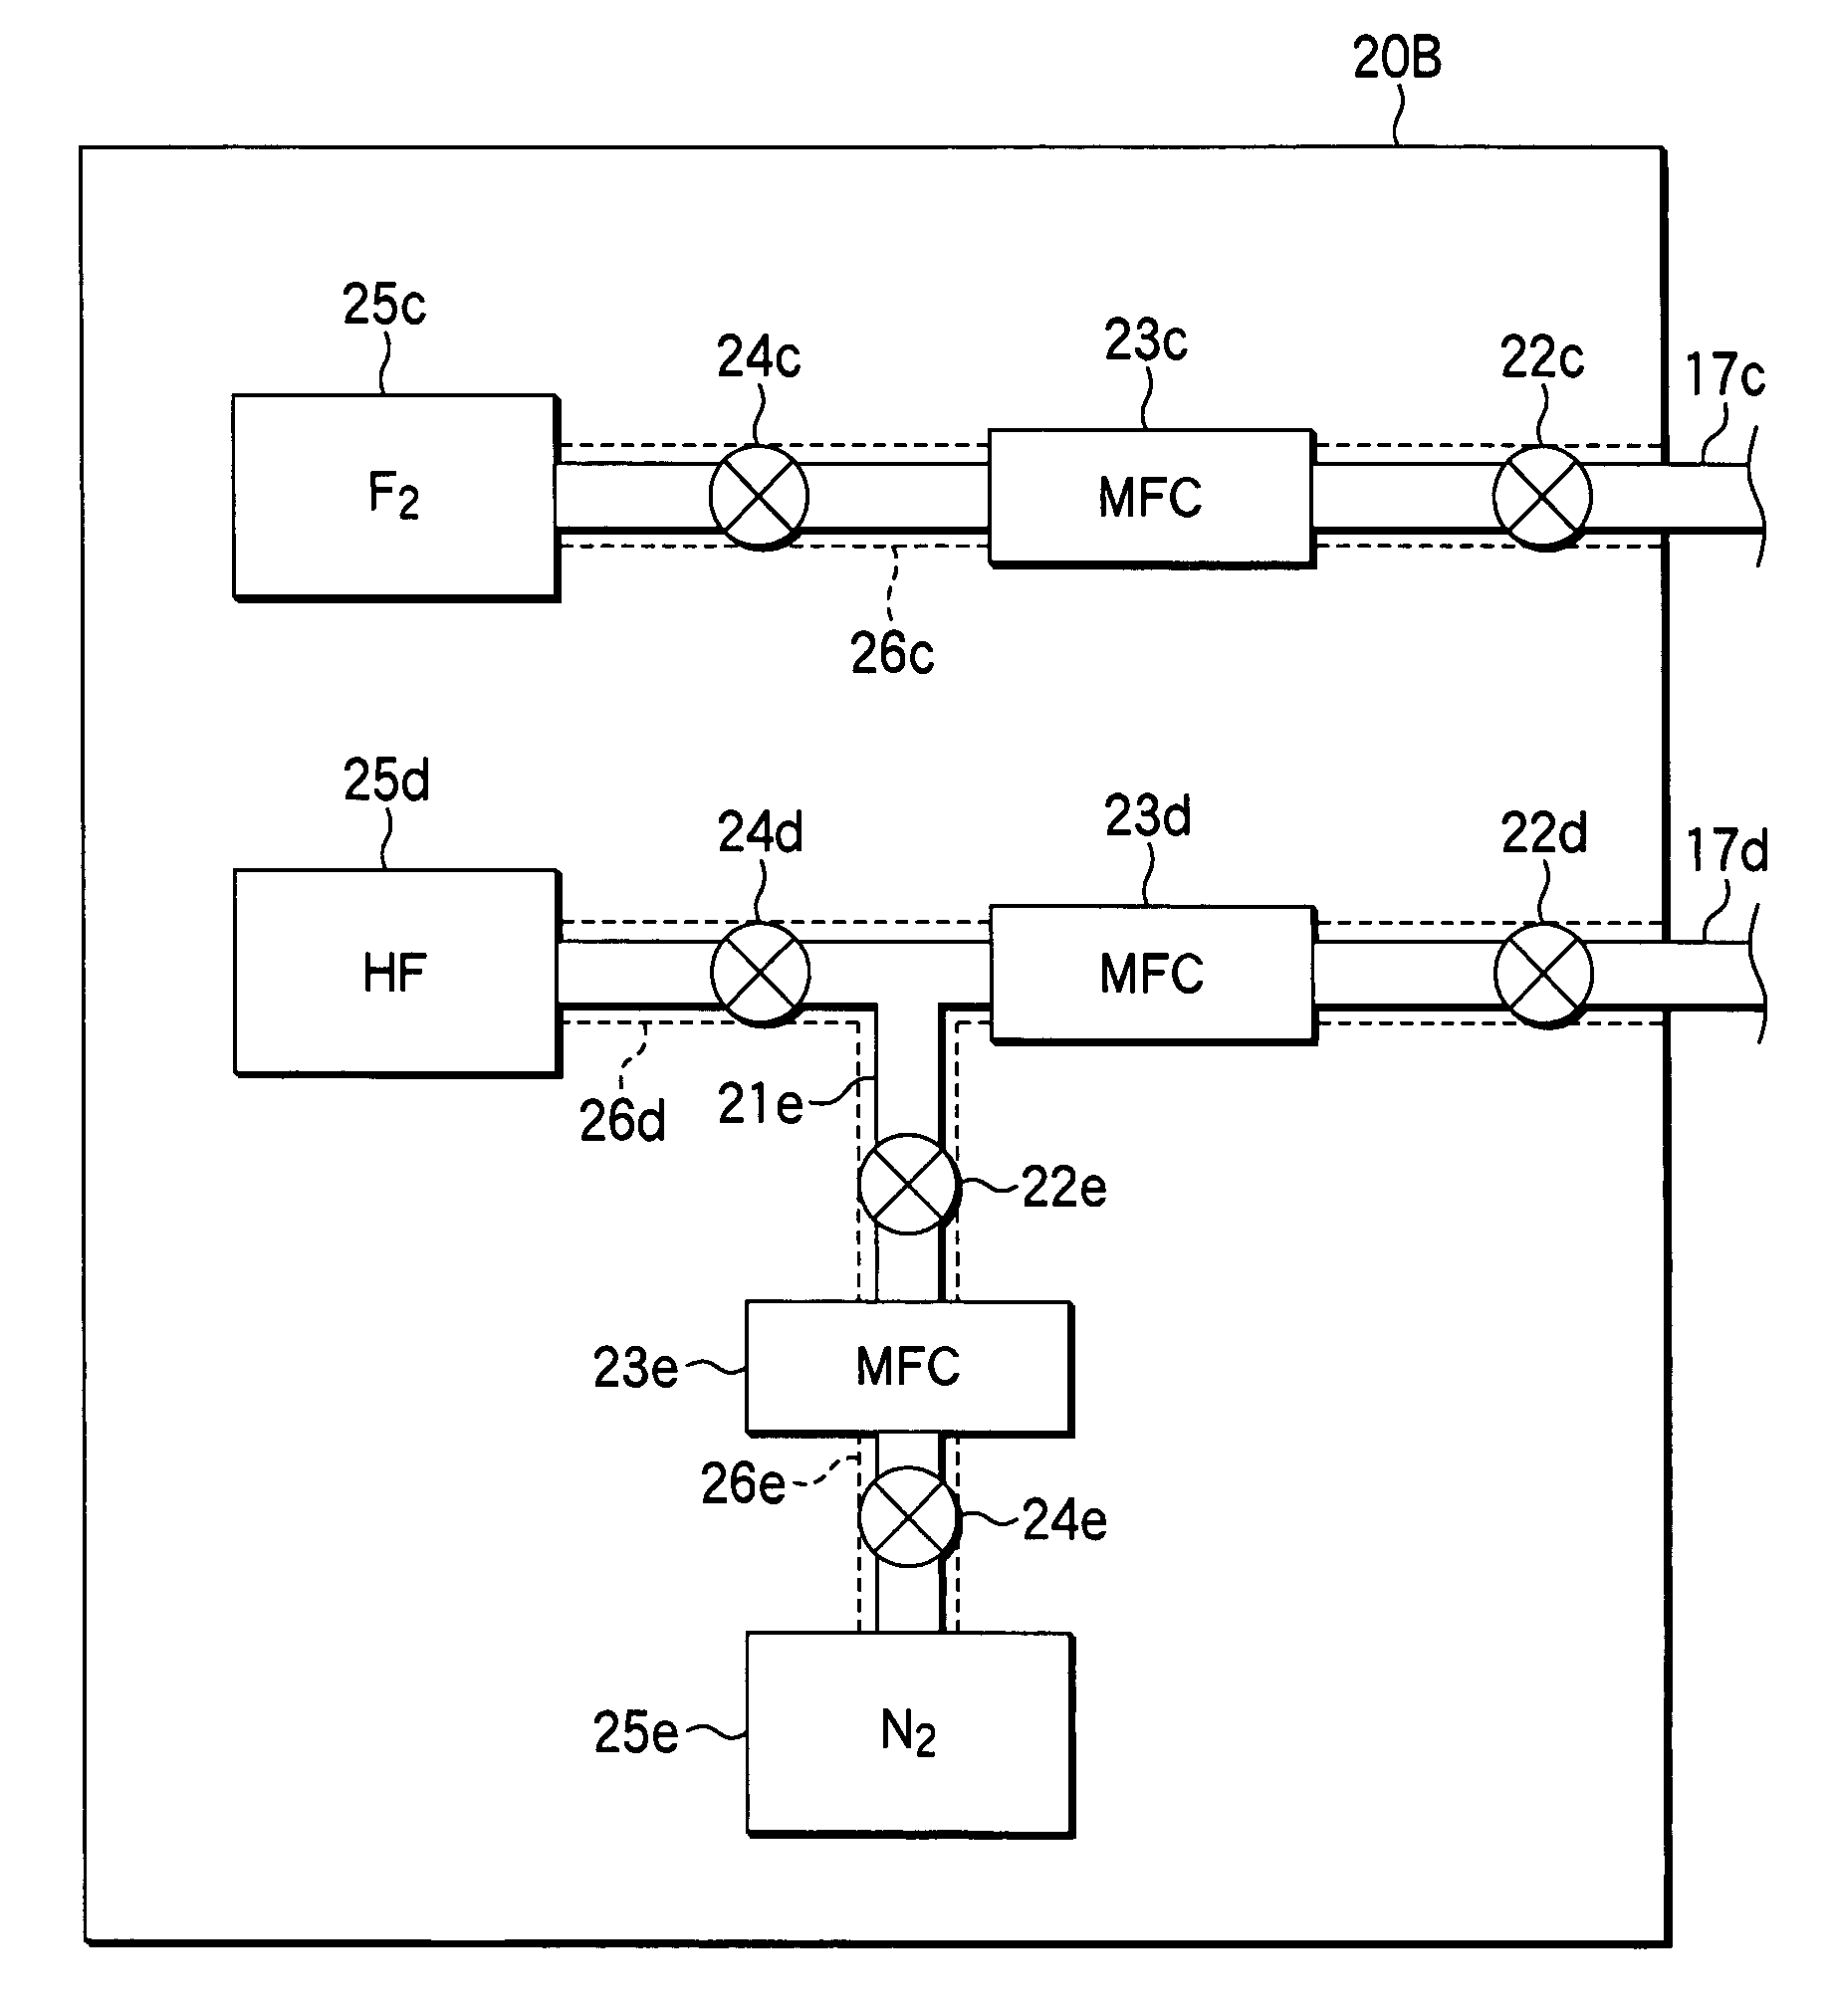 Film formation apparatus for semiconductor process and method for using the same